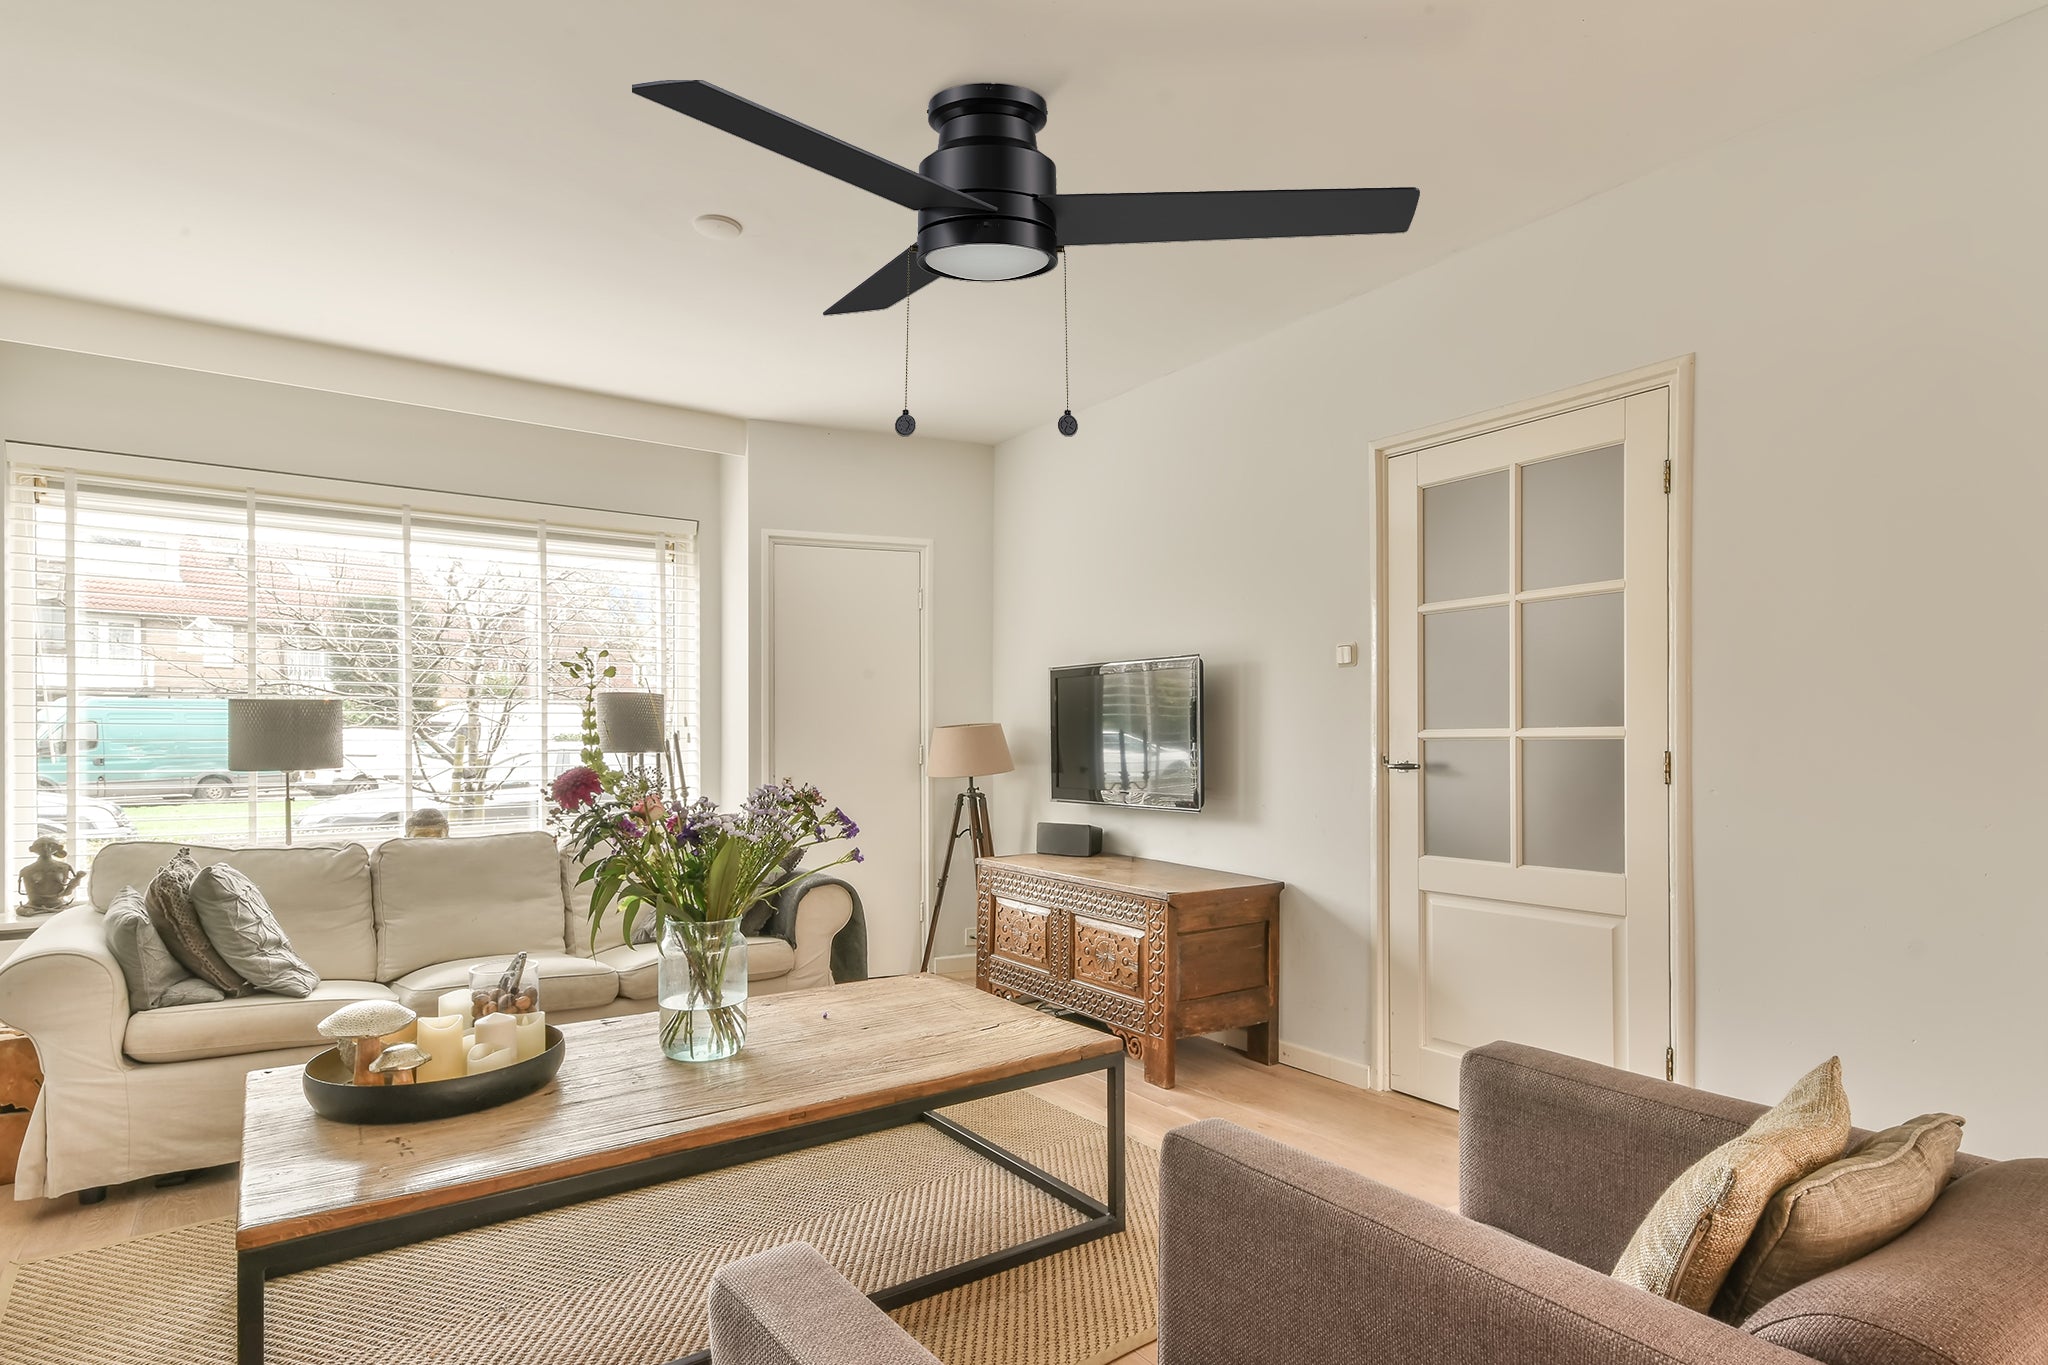 52 inch black flush mounting ceiling fan with LED light and pull chain, matching to white and brown sofa, wooden coffee table, white door, which makes the whole bedroom color collocation is very reasonable, and has a modern sense.